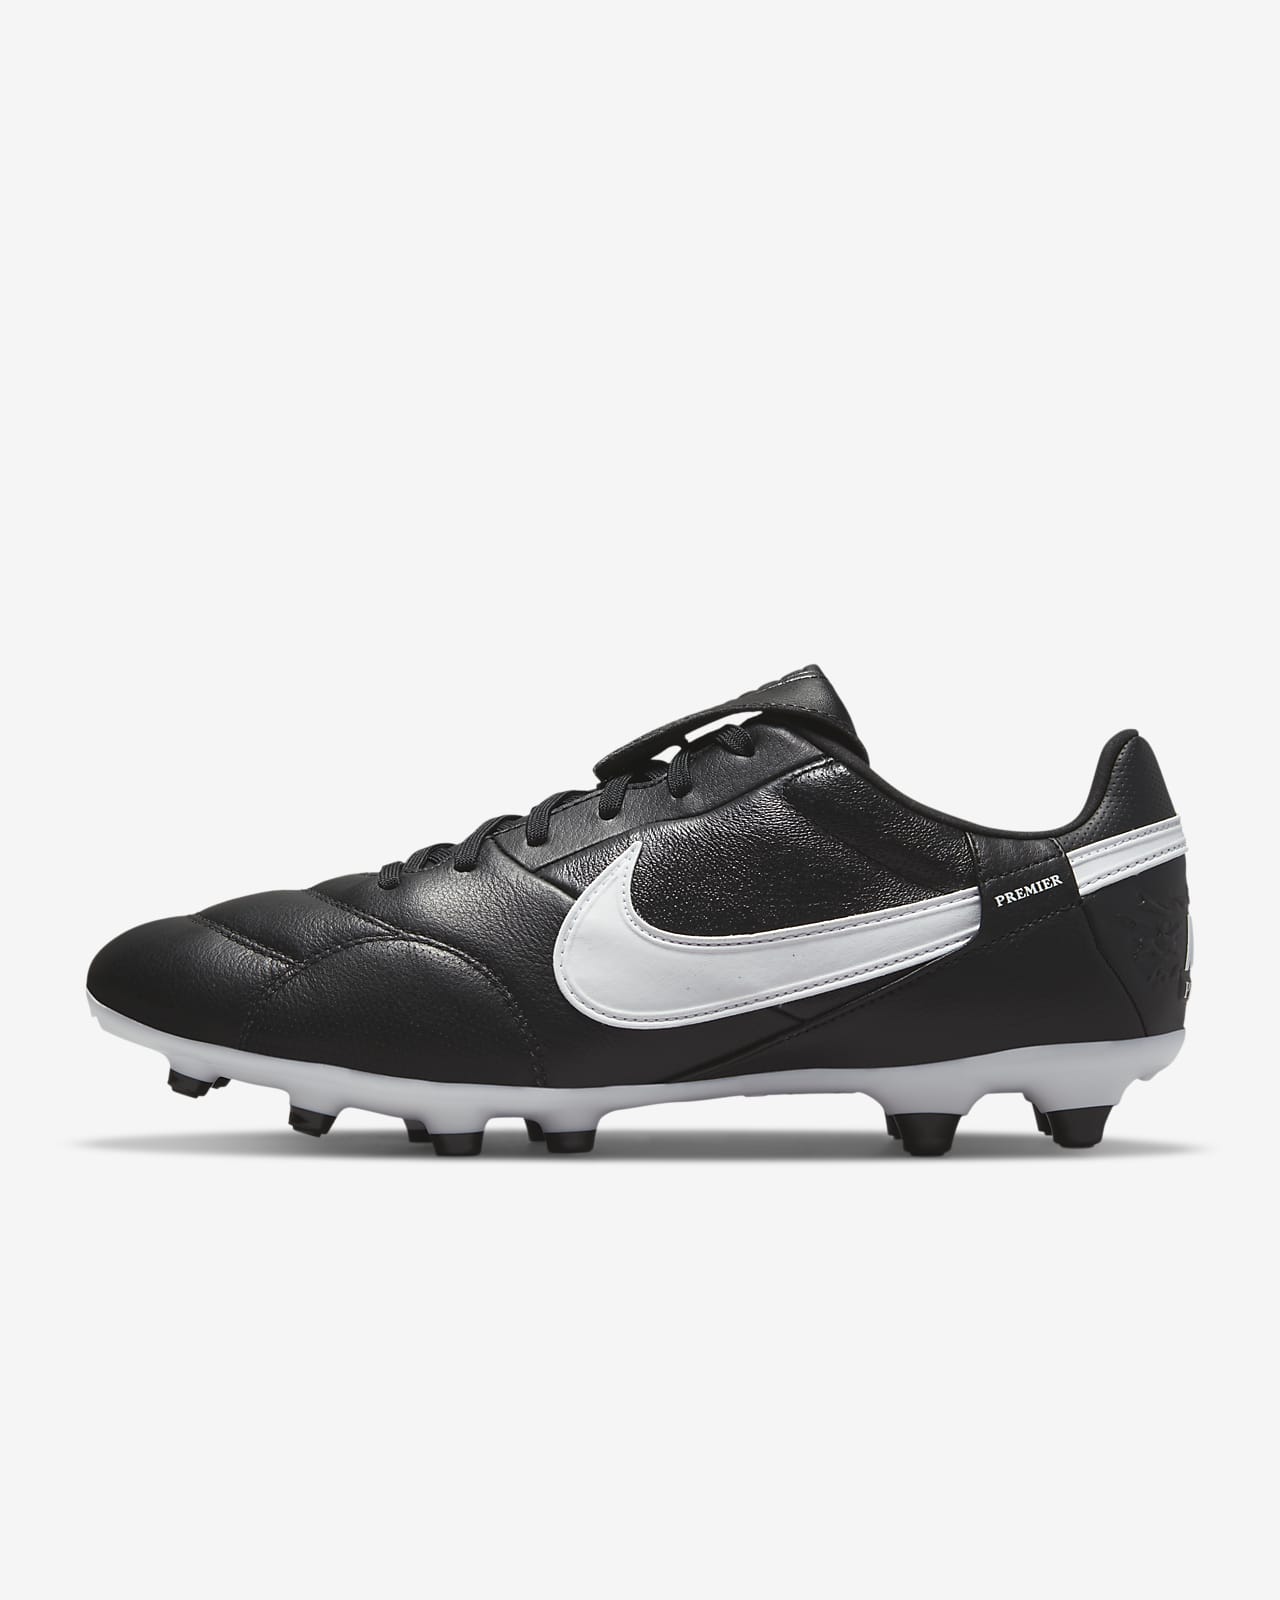 cabina Problema Señor The Nike Premier 3 FG Firm-Ground Football Boot. Nike IN